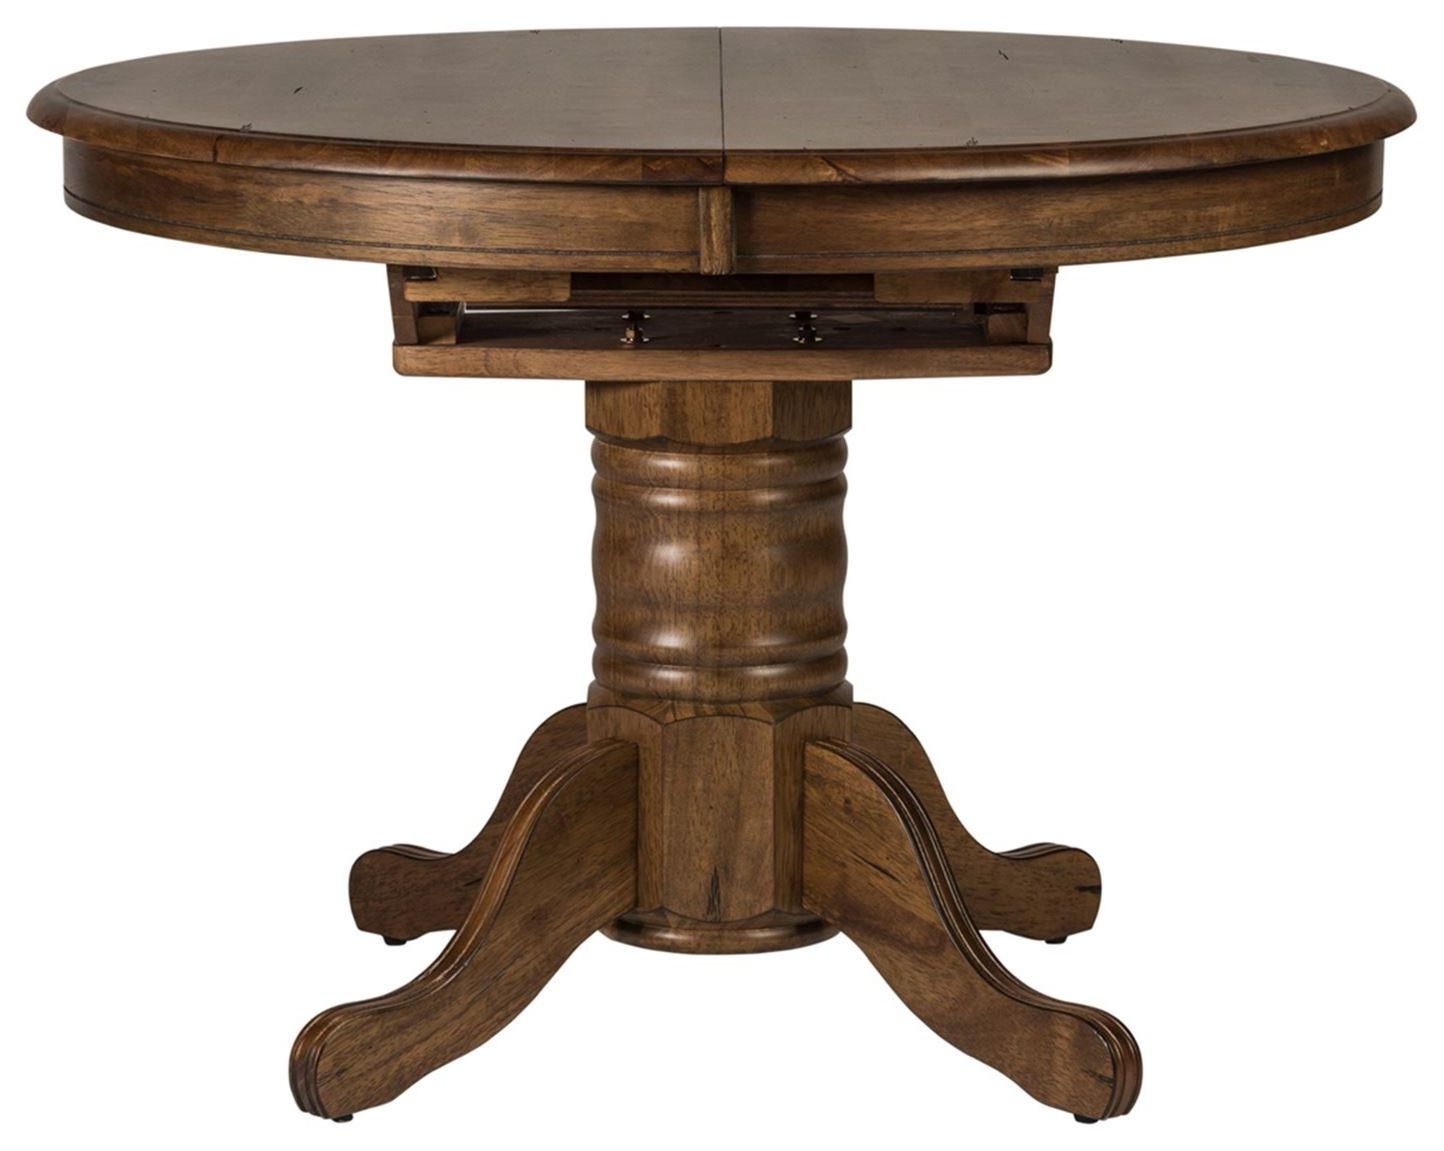 Most Popular Freedom Furniture Carolina Crossing Transitional Oval With Sevinc Pedestal Dining Tables (View 3 of 20)